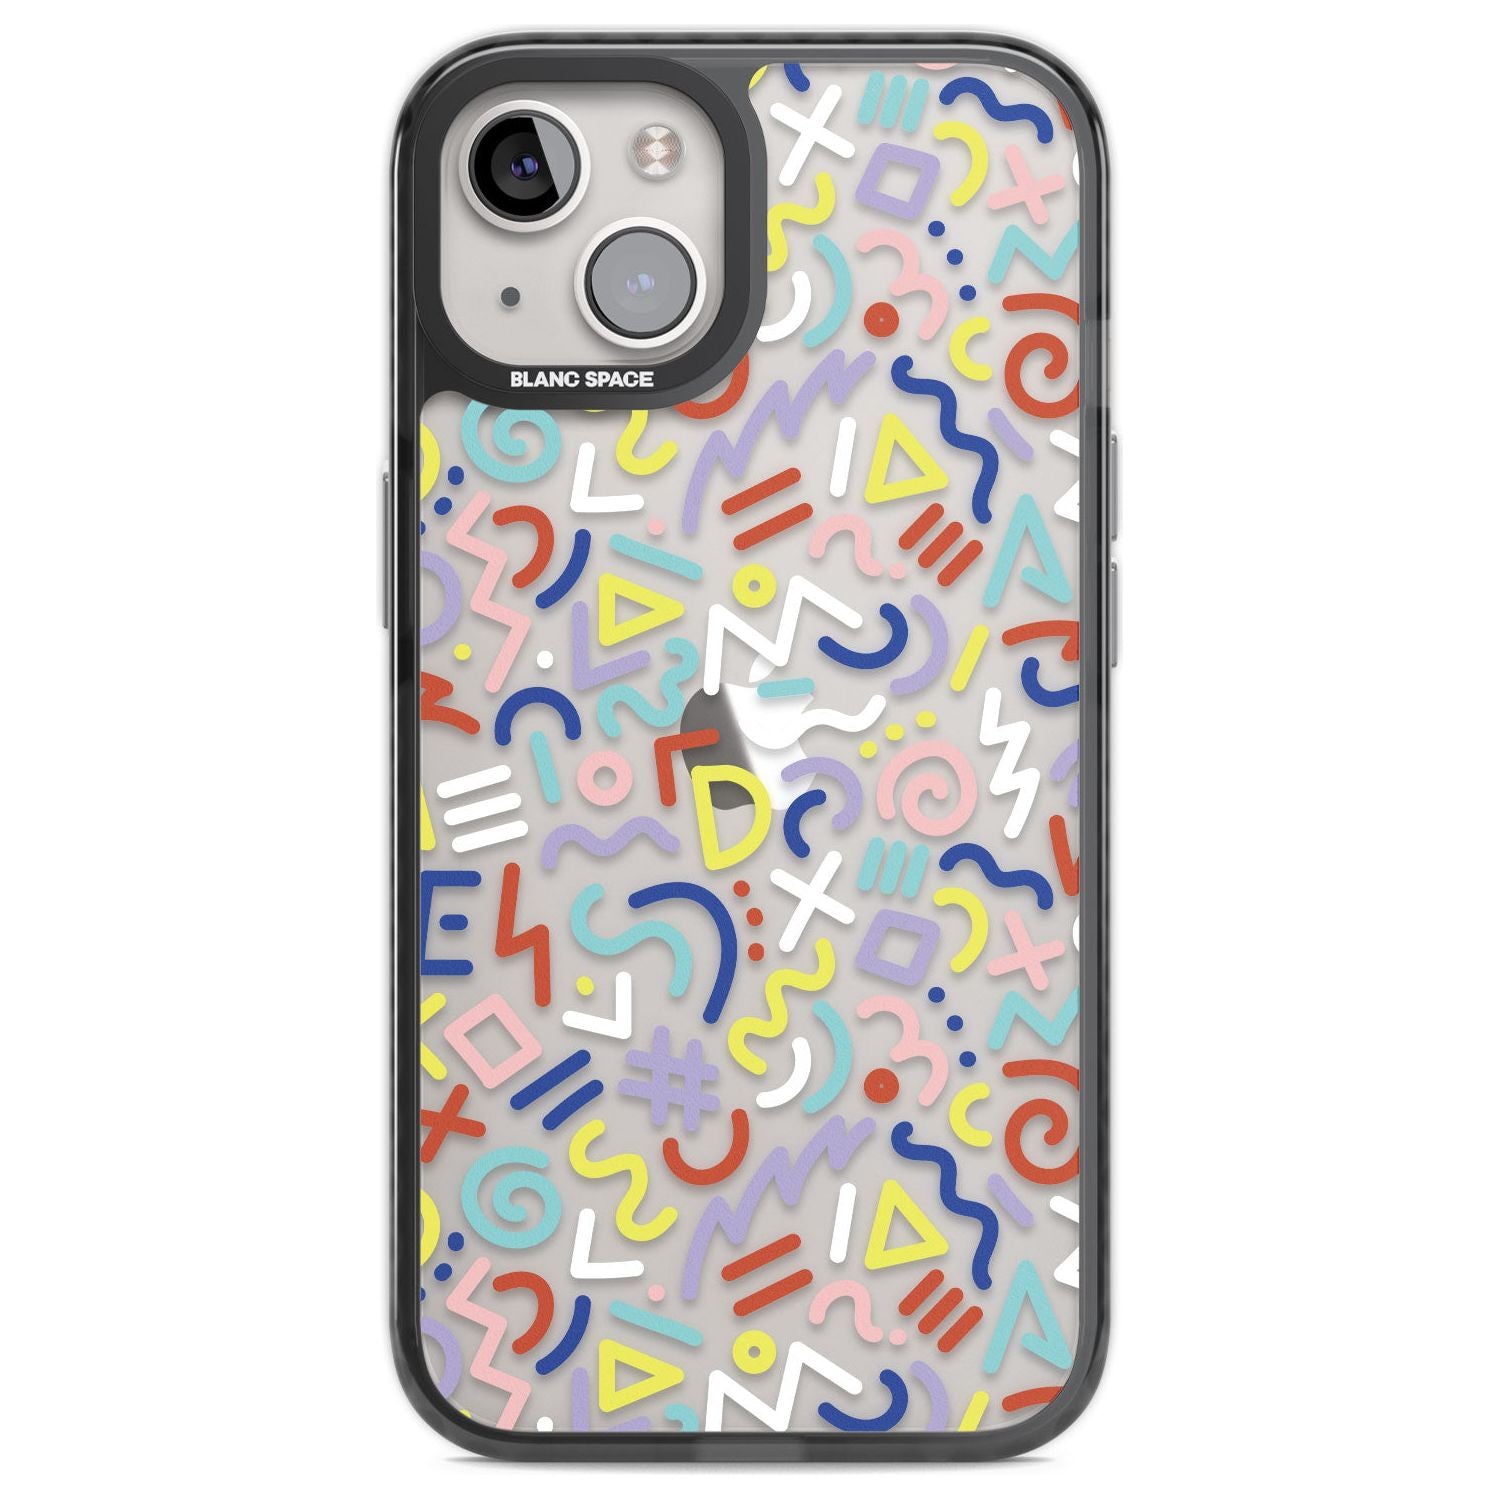 Colourful Mixed Shapes Retro Pattern Design Phone Case iPhone 12 / Black Impact Case,iPhone 13 / Black Impact Case,iPhone 12 Pro / Black Impact Case,iPhone 14 / Black Impact Case,iPhone 15 Plus / Black Impact Case,iPhone 15 / Black Impact Case Blanc Space